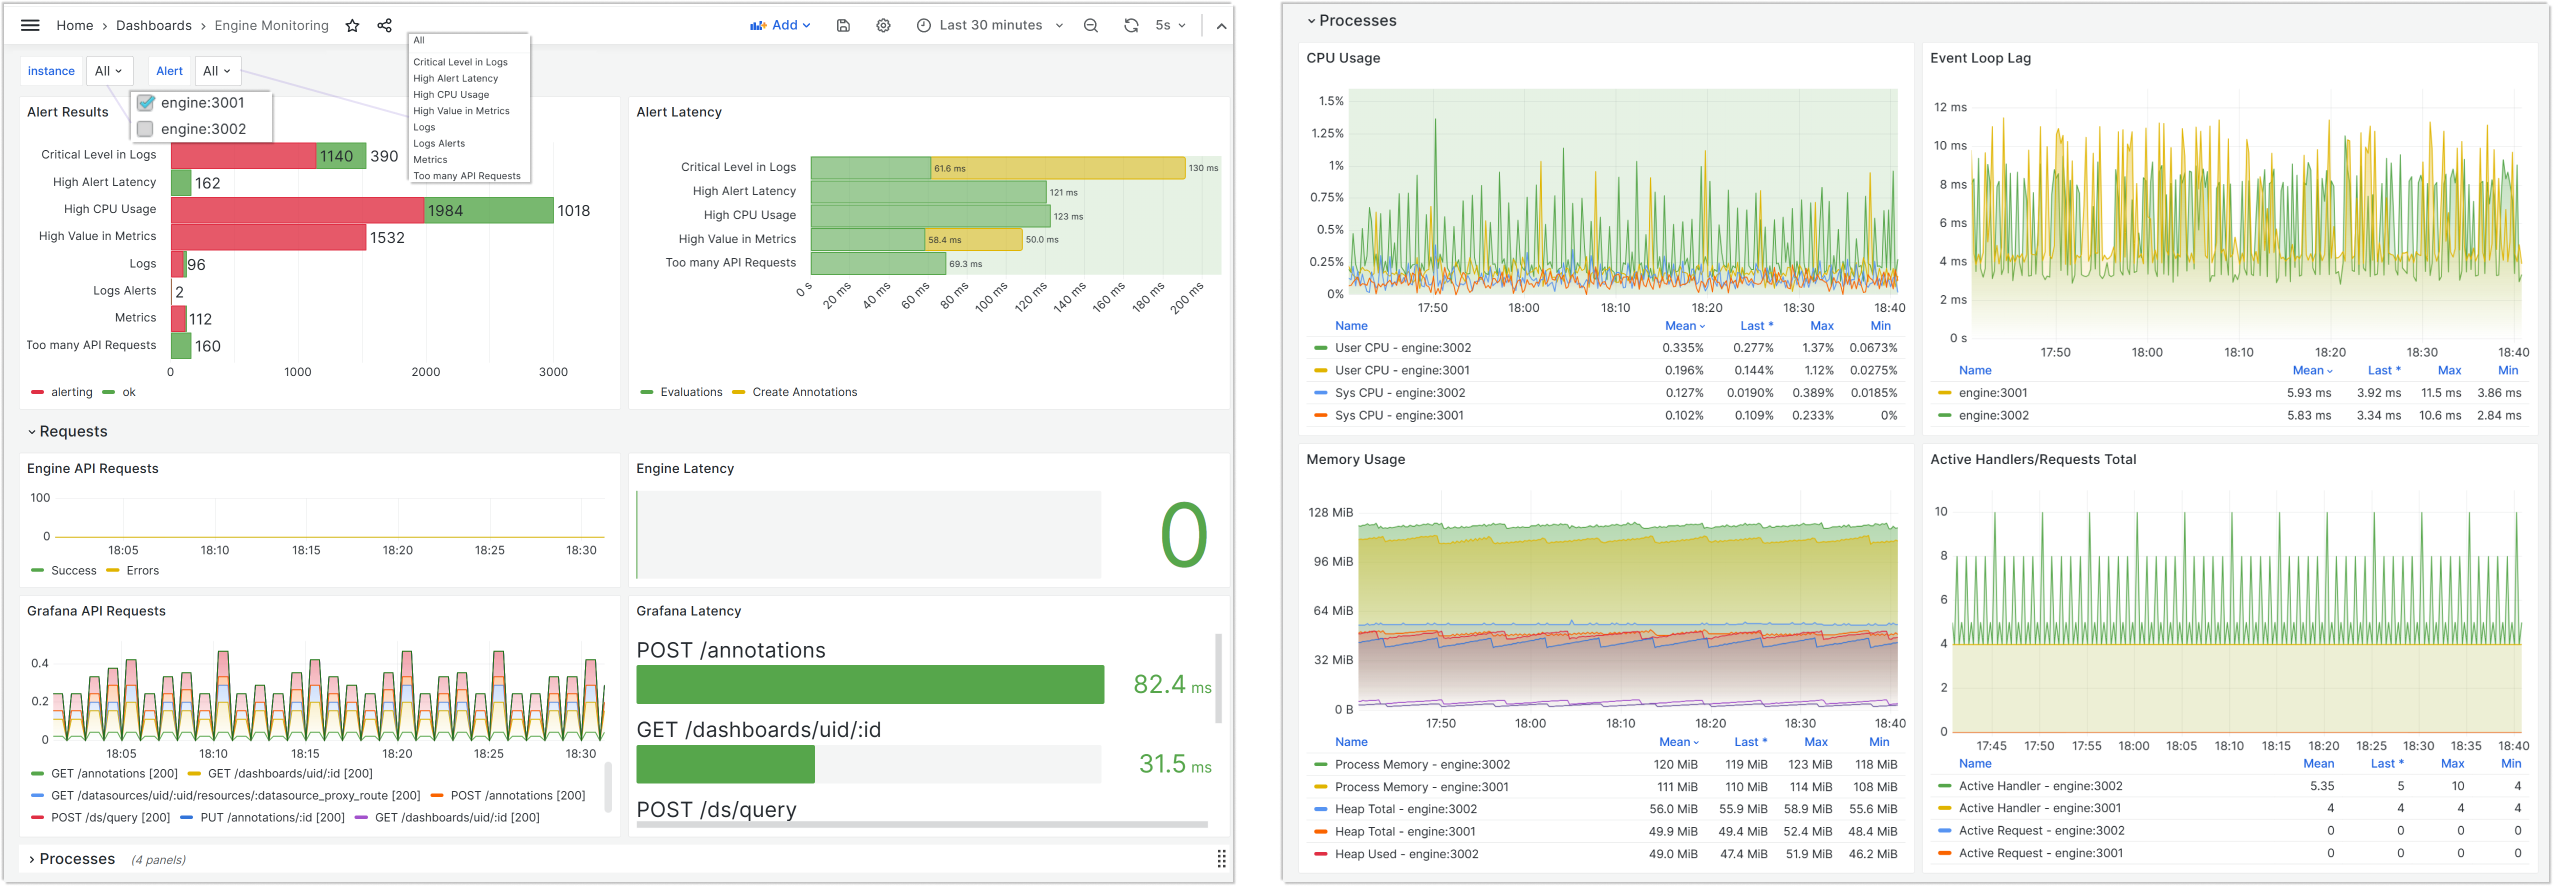 Built-in BI Engine monitoring dashboard. Data collected and stored via Prometheus.